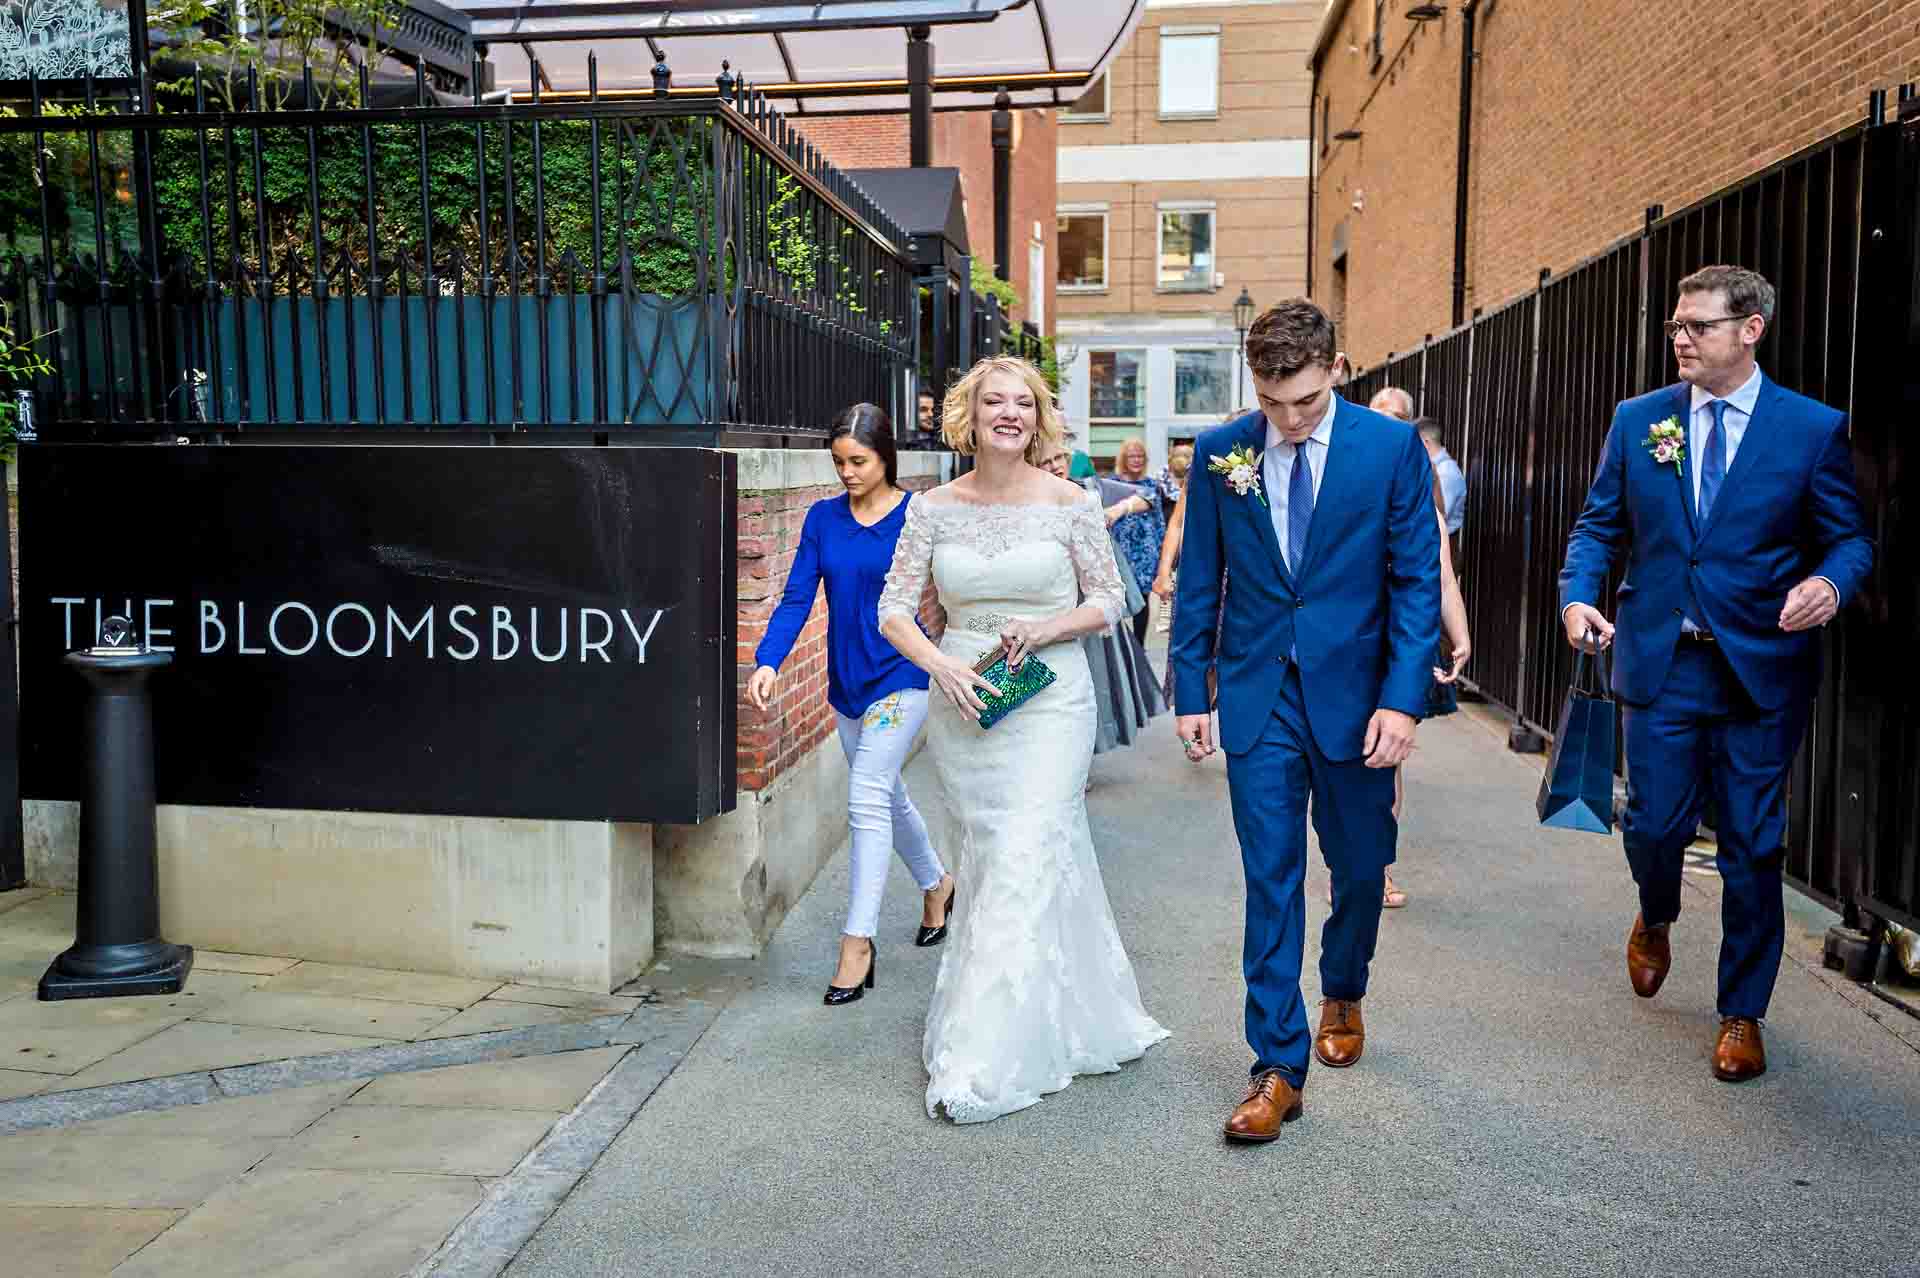 Wedding party leaving the Bloomsbury Hotel in London